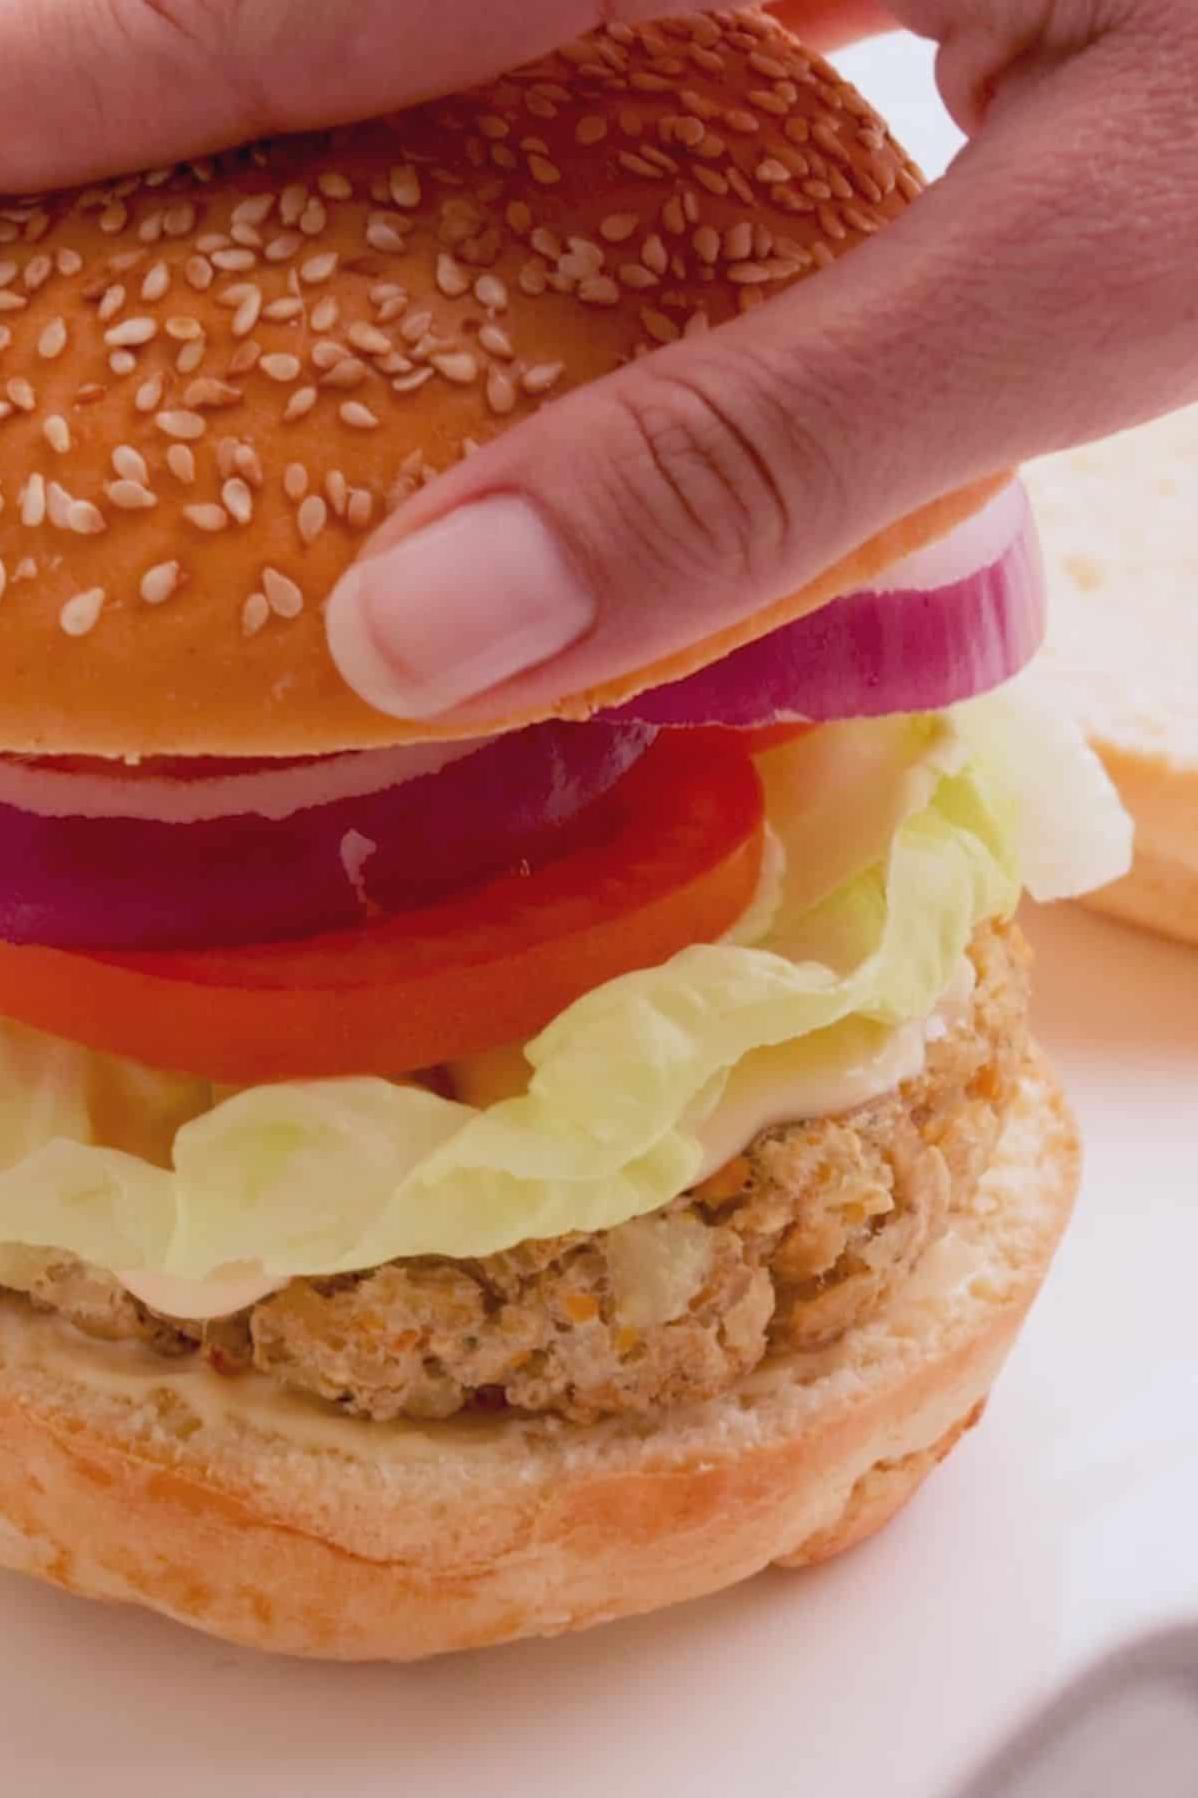  No gluten? No problem! You won't even miss it with this tasty burger.